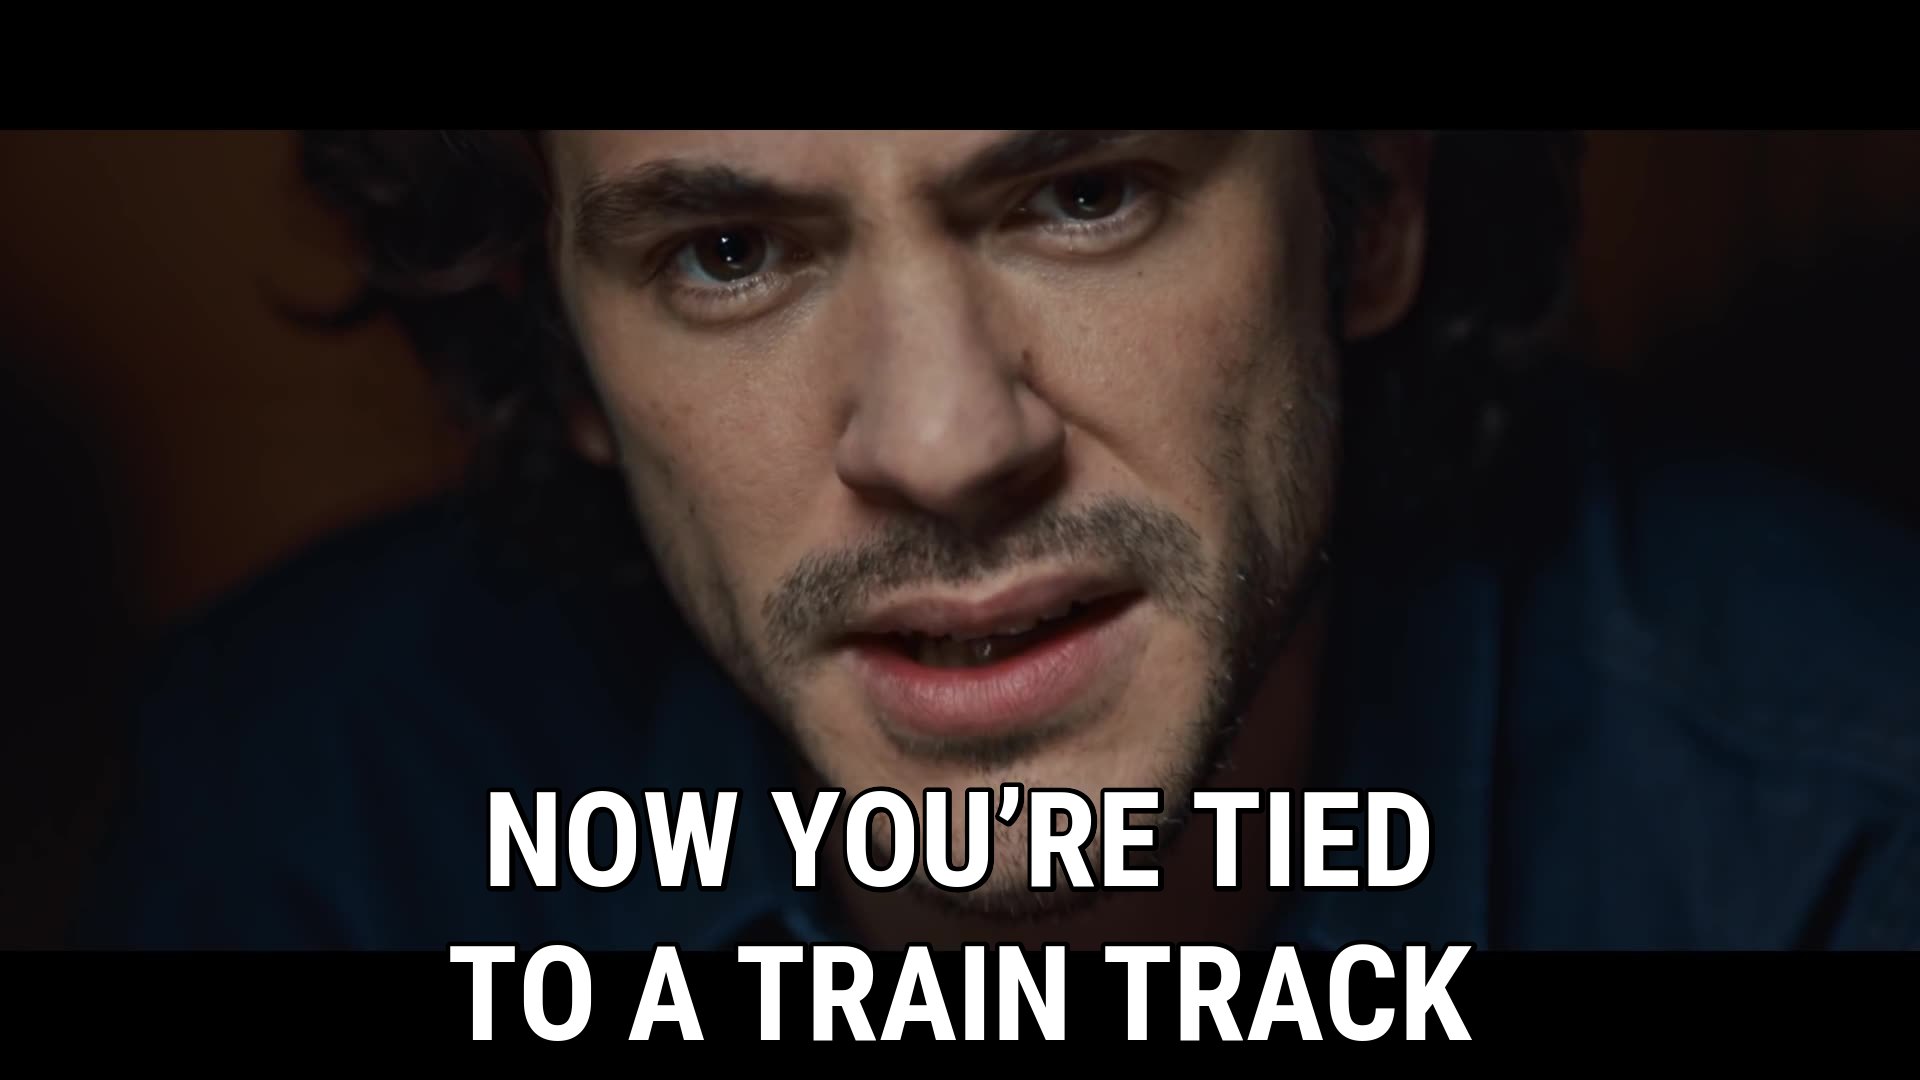 Jack; Tied to a train track Blank Meme Template